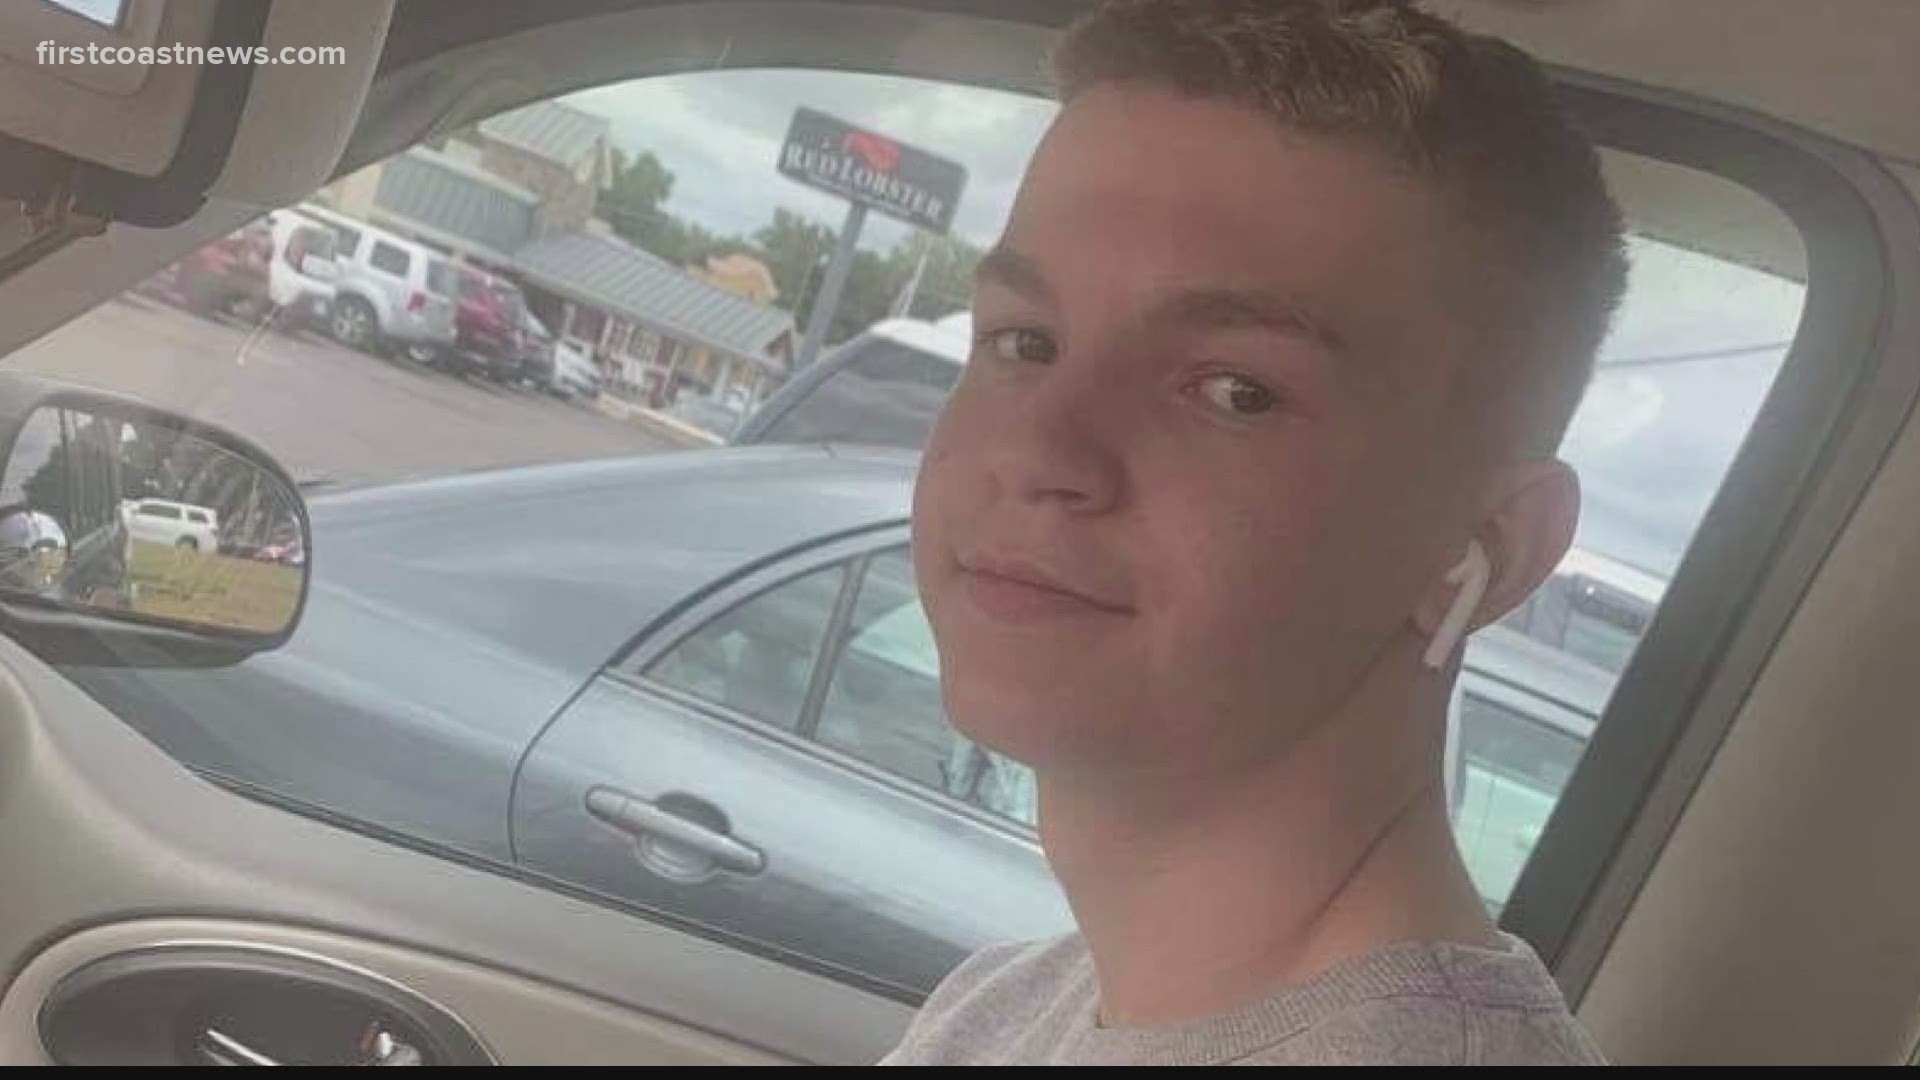 Skylar Shane, an 18-year-old graduate or Orange Park High School, was shot and killed Tuesday. His family says he was a caring person who loved to make people laugh.